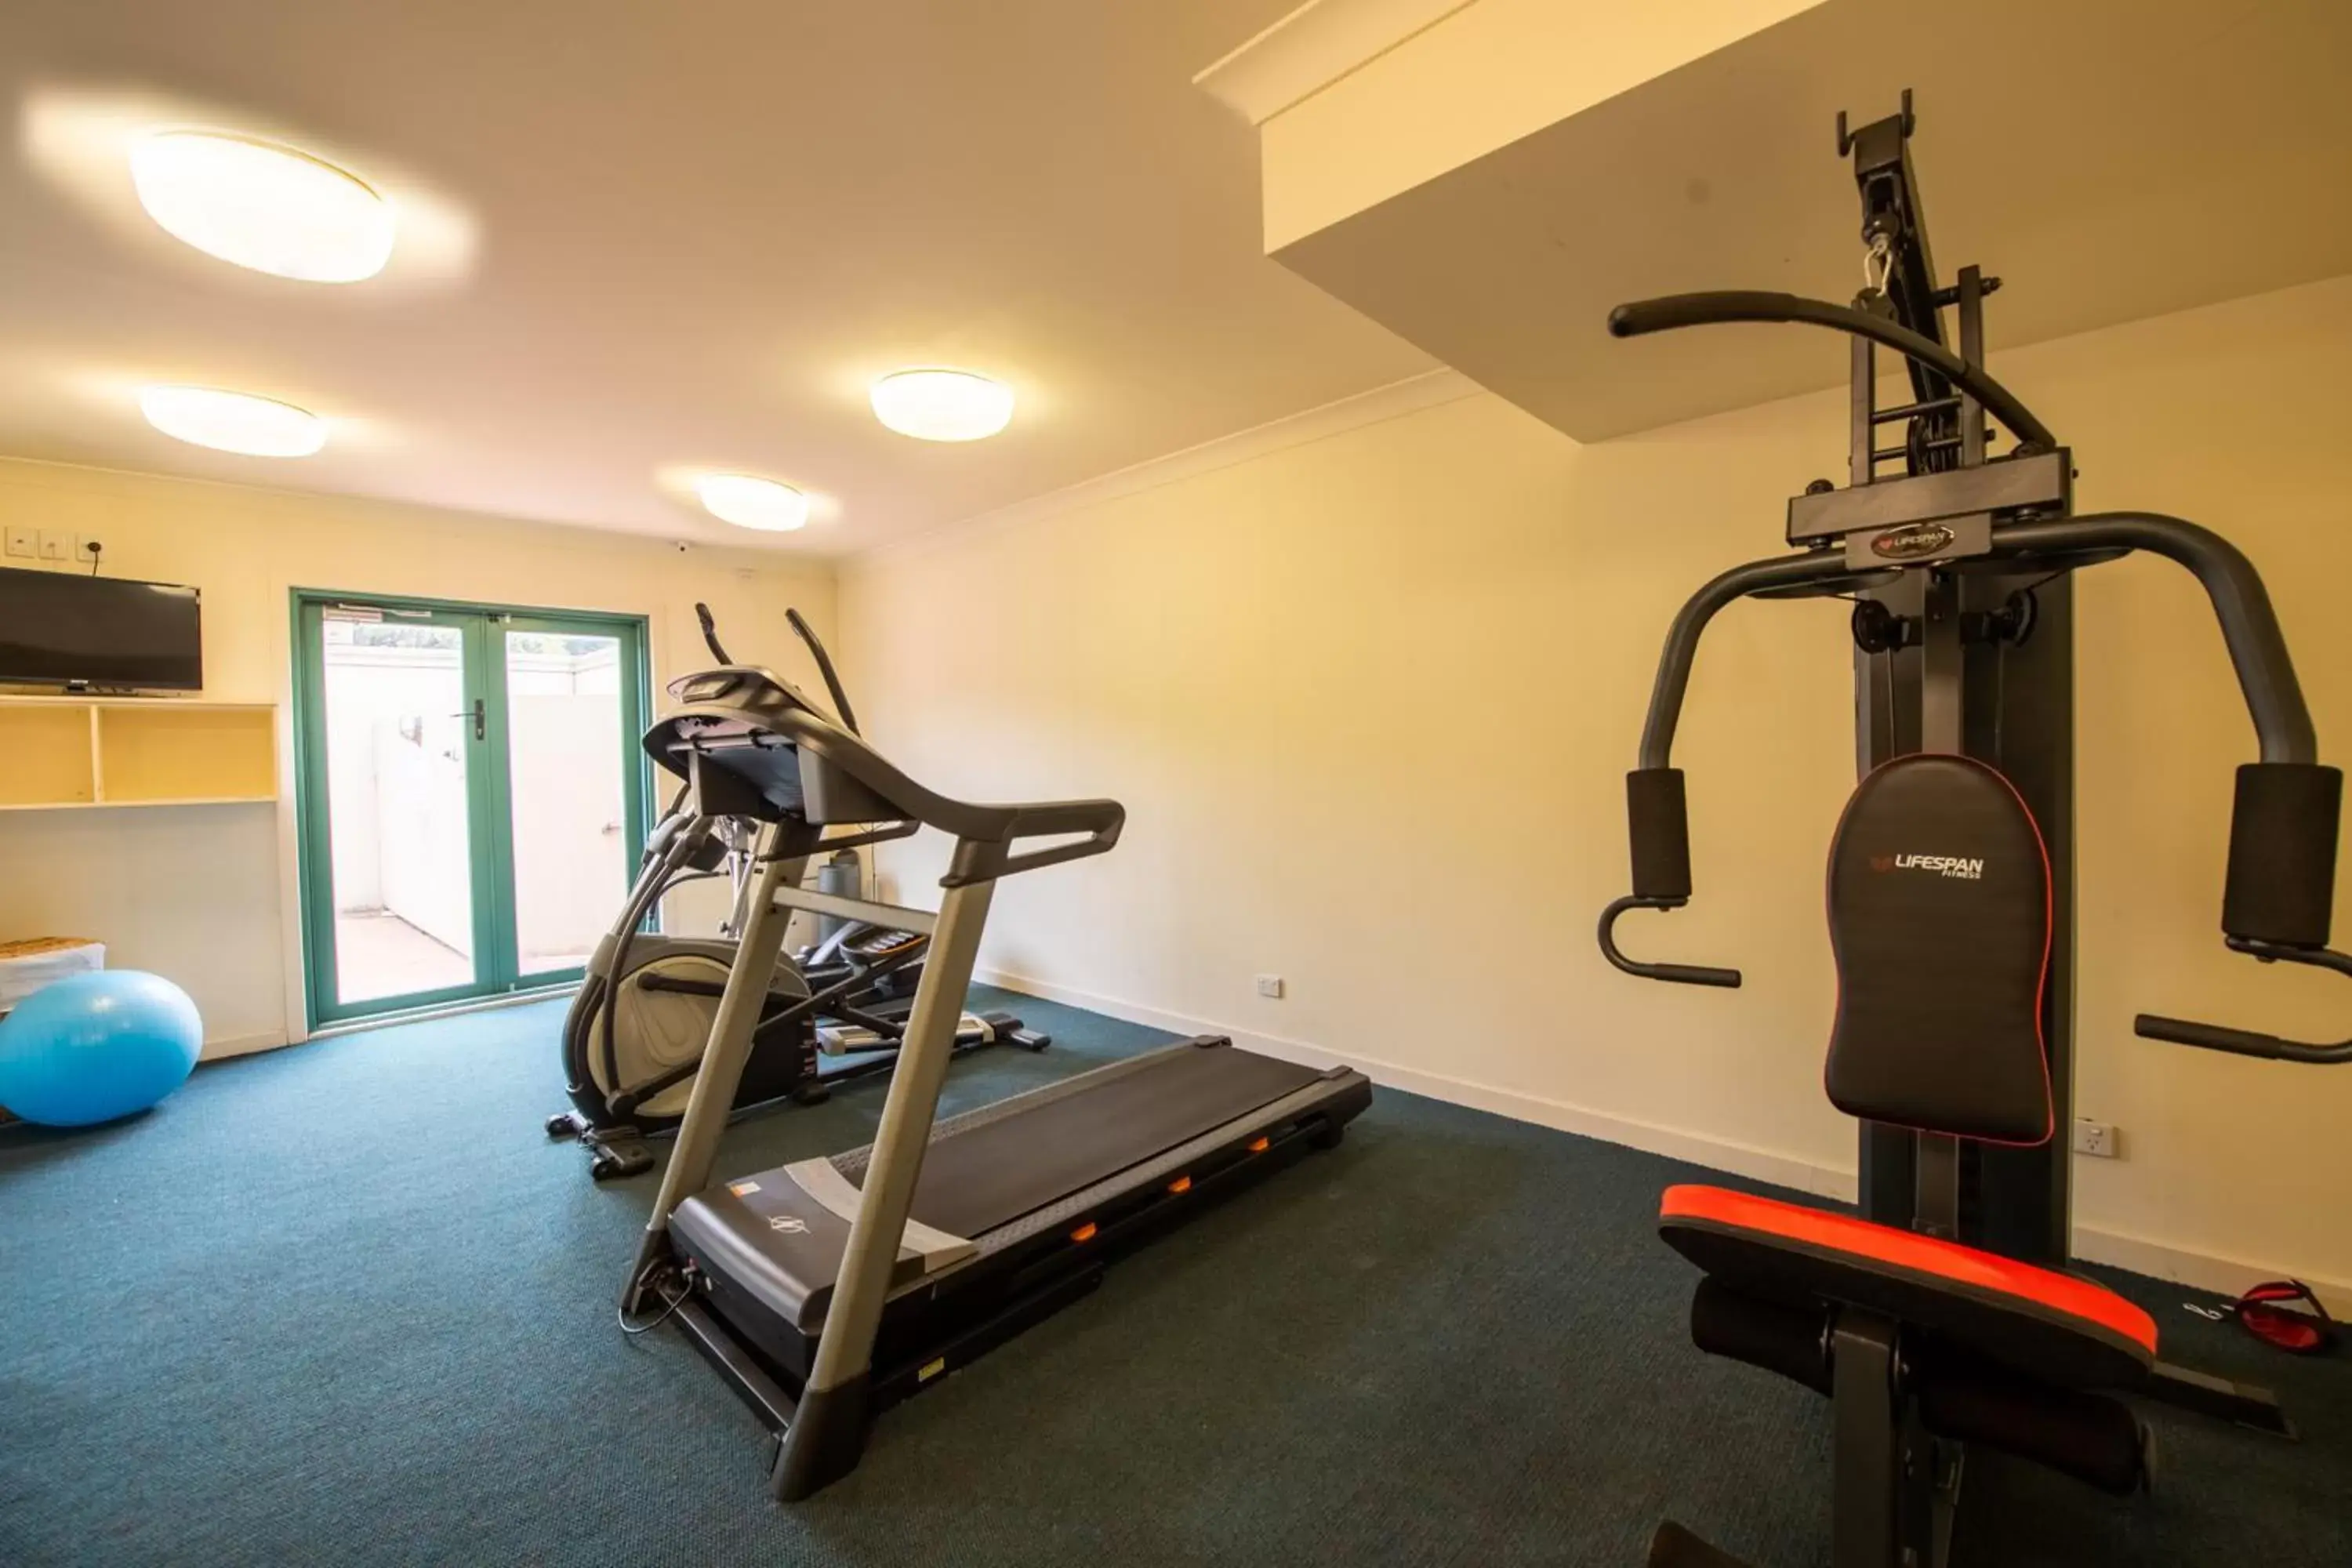 Fitness centre/facilities, Fitness Center/Facilities in Gateway on Monash